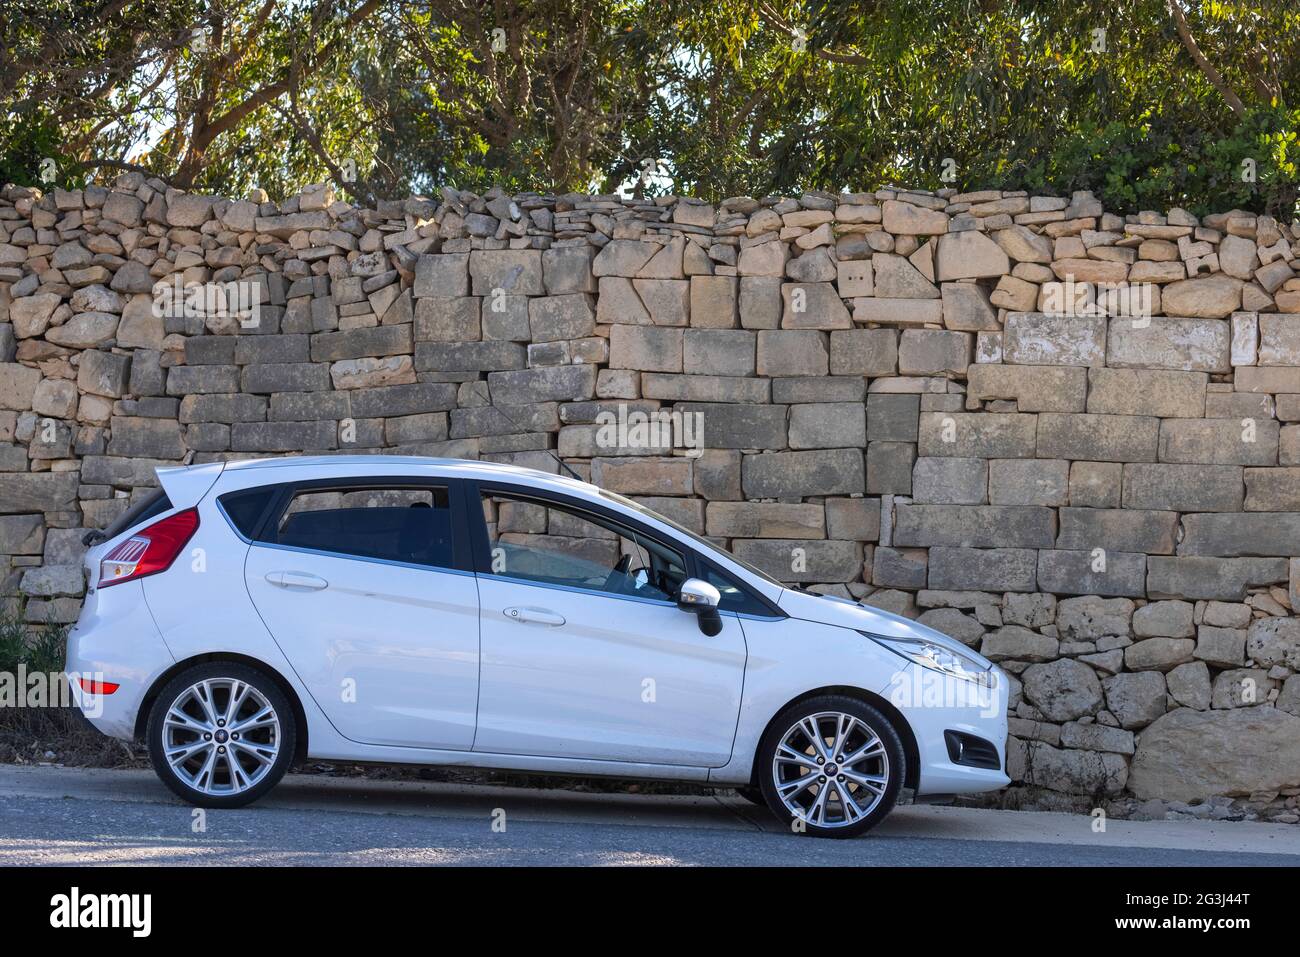 A 2016 Ford Fiesta Ecoboost Stock Photo - Alamy